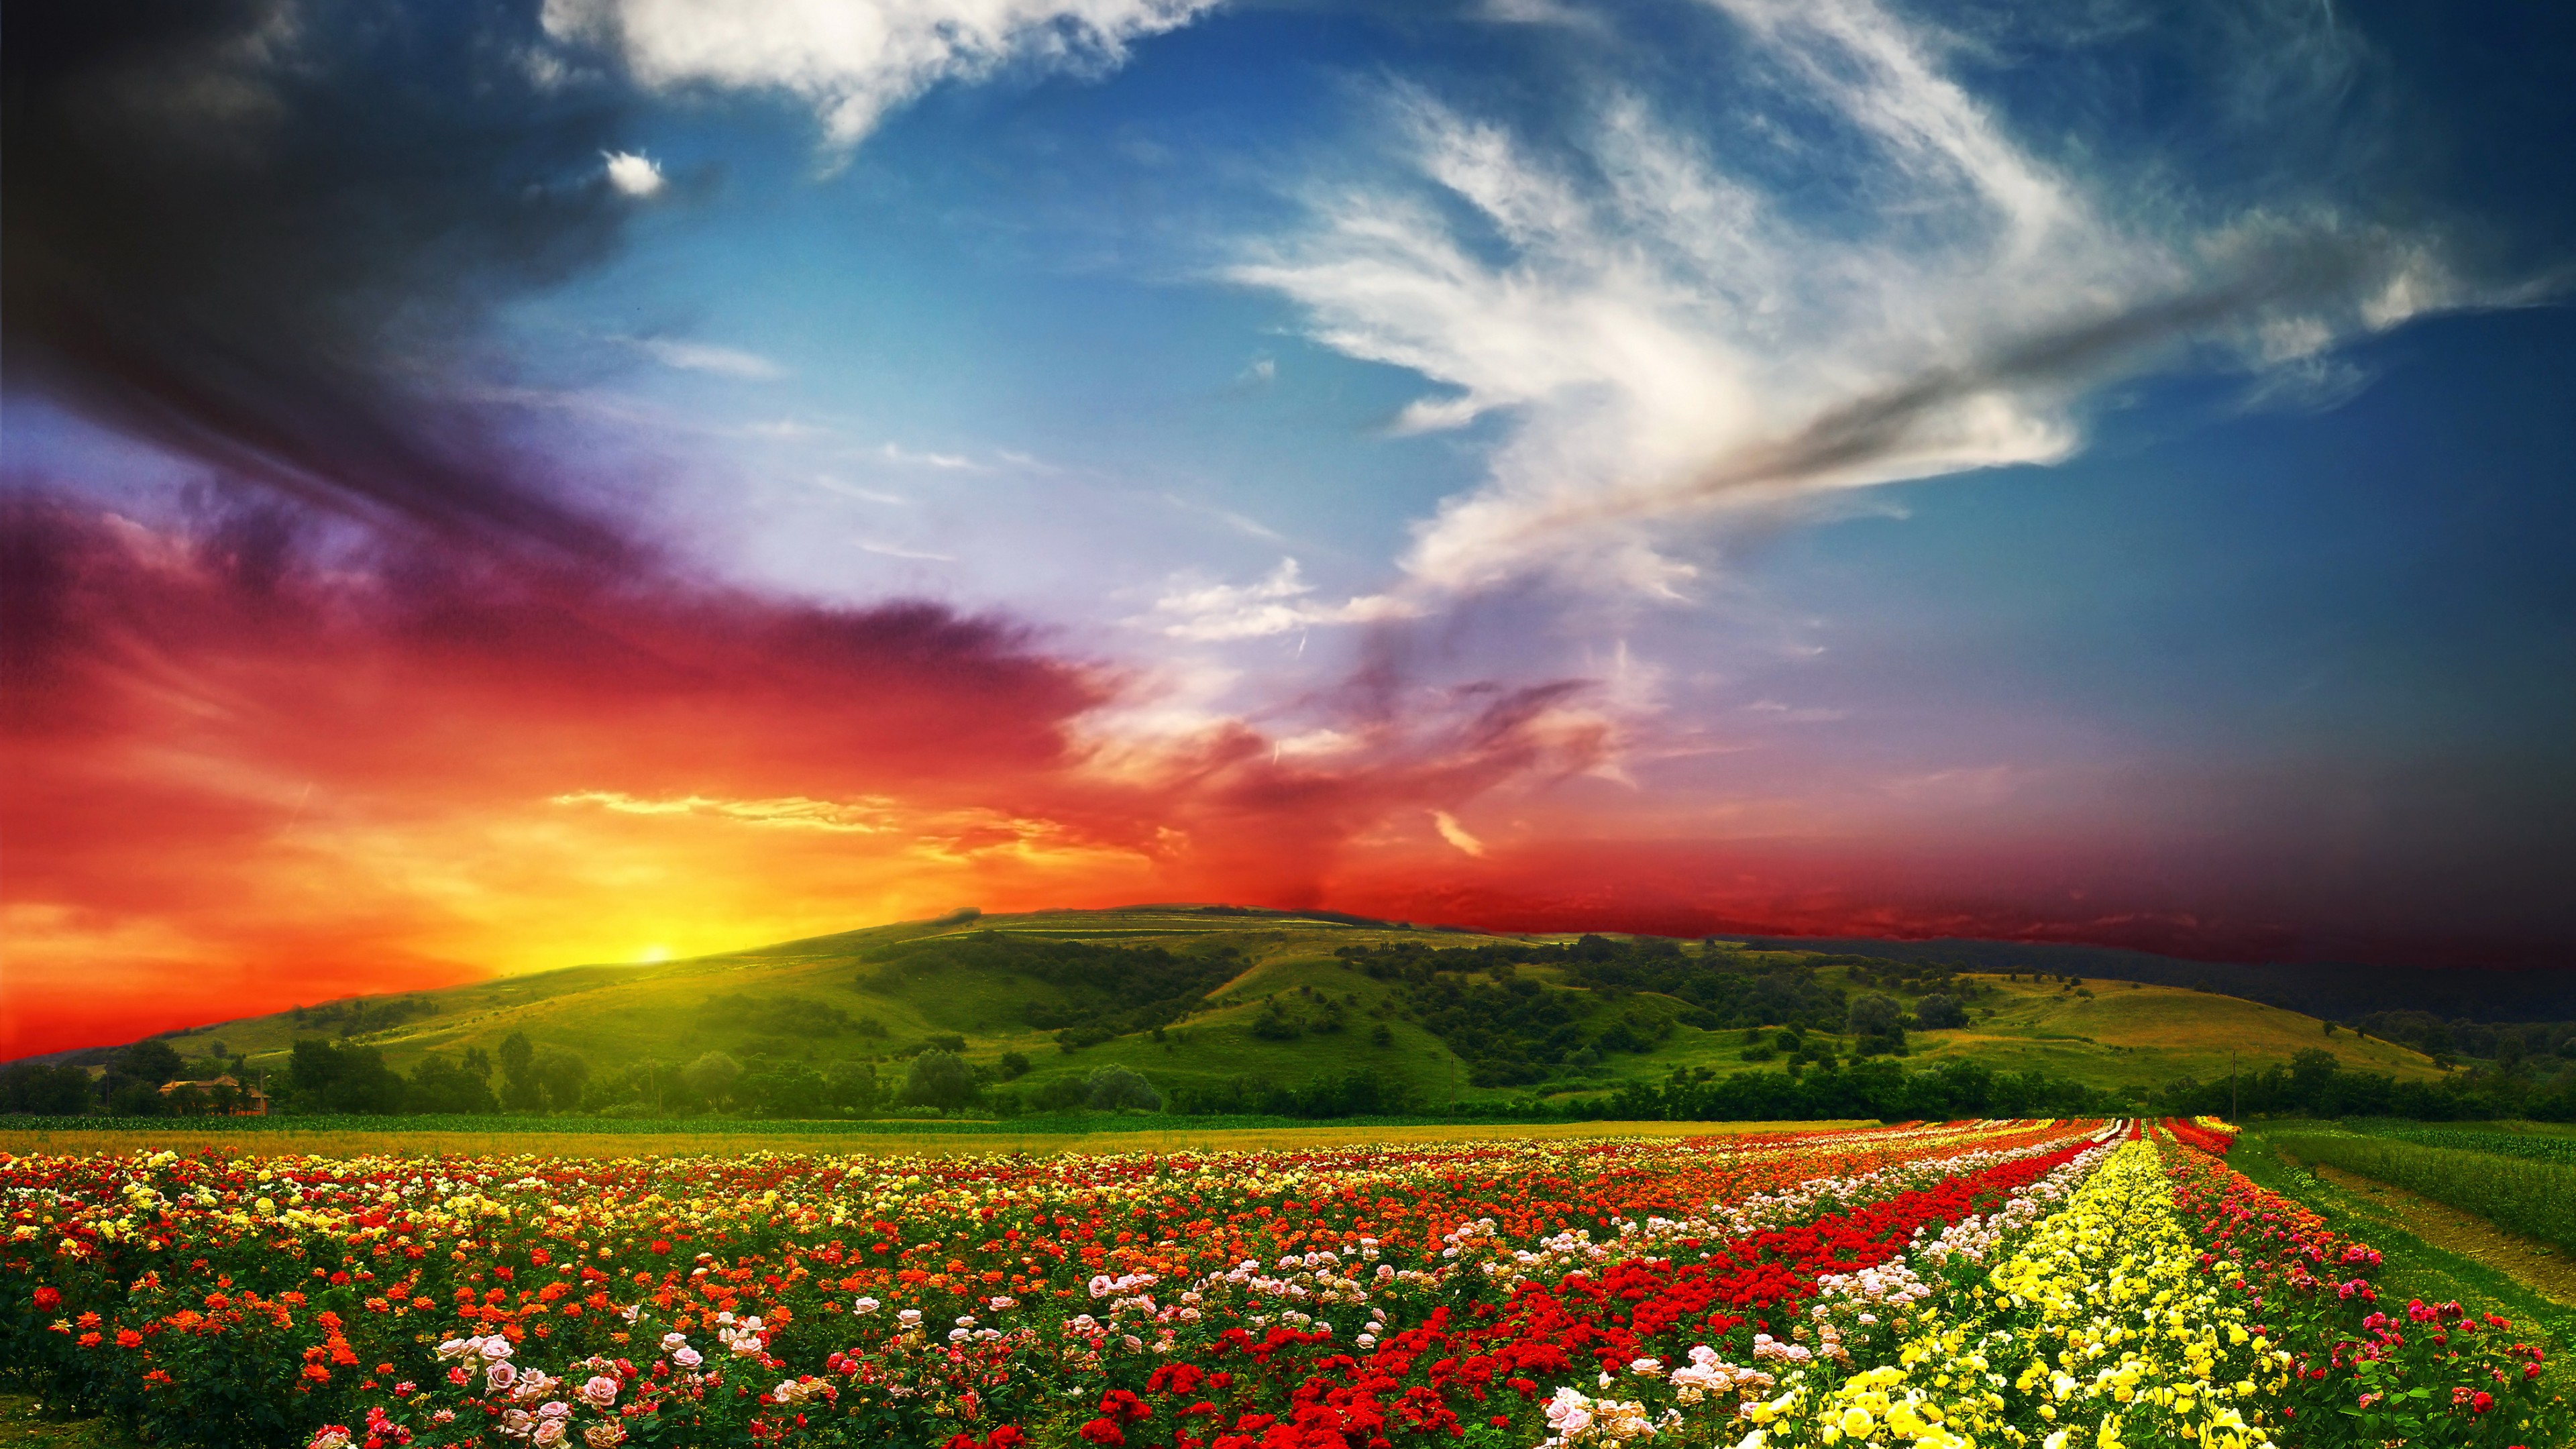 Wallpaper India, 5k, 4k wallpaper, Valley of Flowers, Meadows, roses, sunset, clouds, Nature